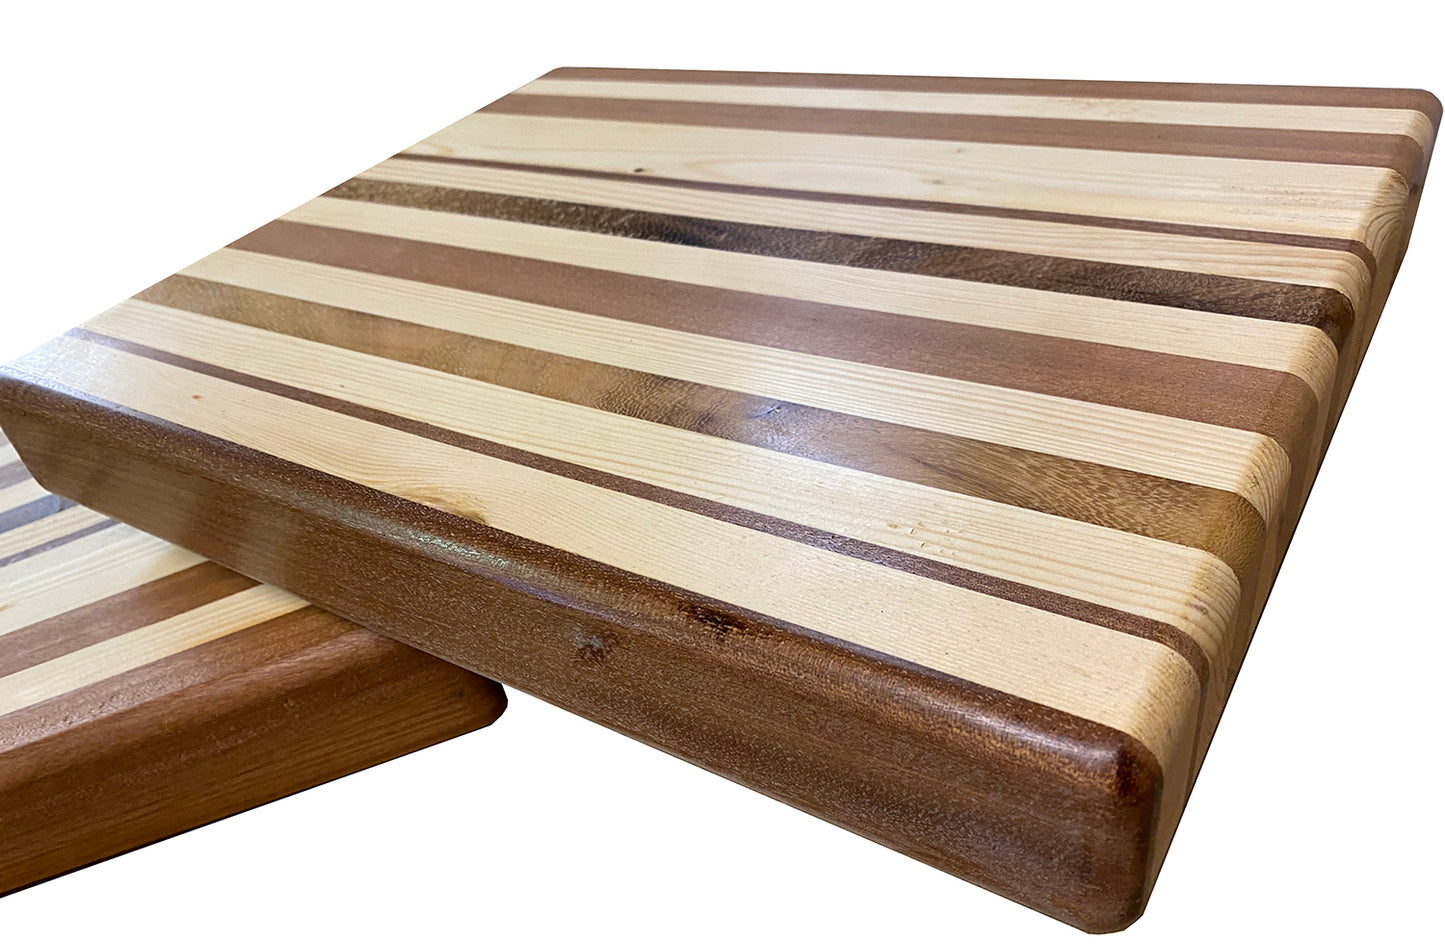 Chopping Board. Mixed hardwood and Pine. Very solid piece